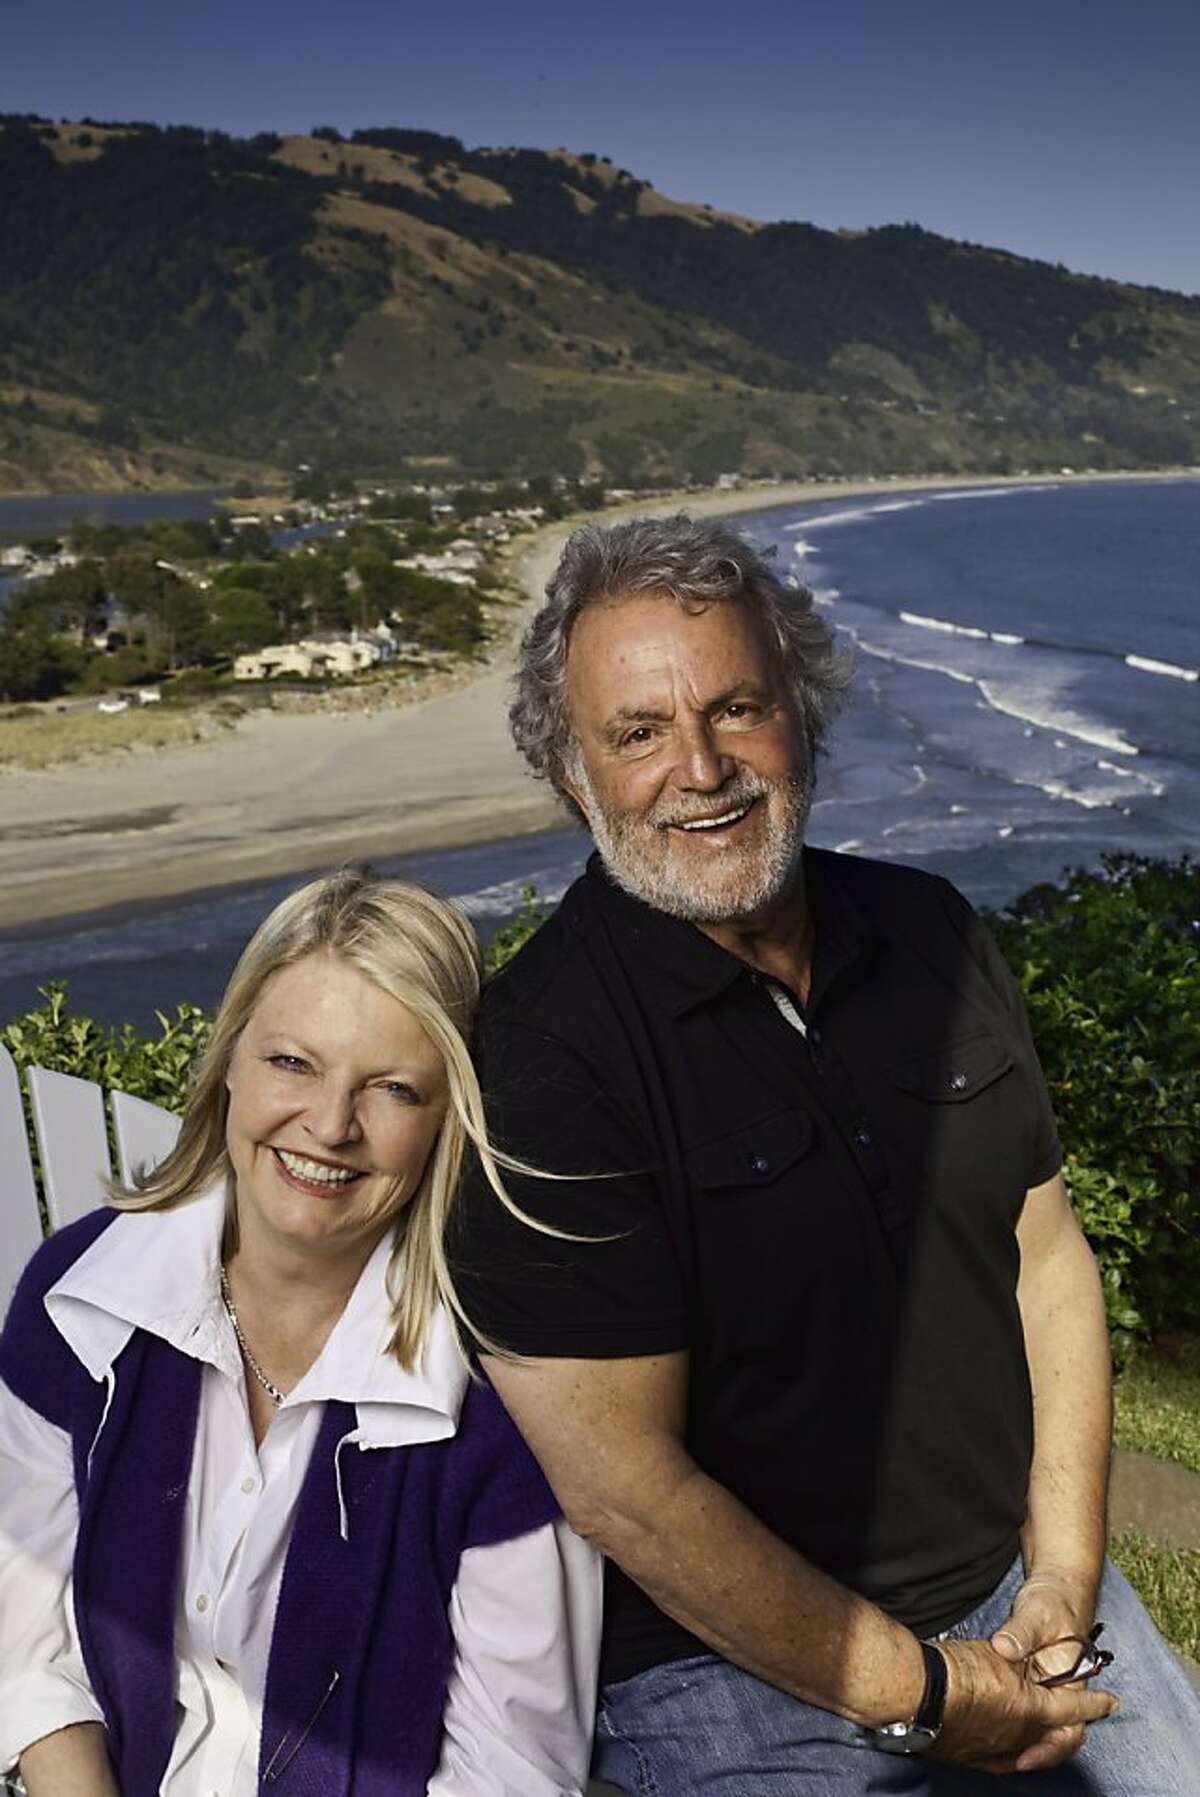 Nancy Hult Ganis and her husband Sid Ganis at their home in Bolinas, California, on Friday, July 1, 2011. The fall TV show "Pan Am'' about stewardesses from the '70s was created by Nancy Hult Ganis and her husband Sid Ganis (former prez of Motion Picture Academy of Arts & Sciences). Nancy was a stewardess back then and it is loosely based on her experiences.